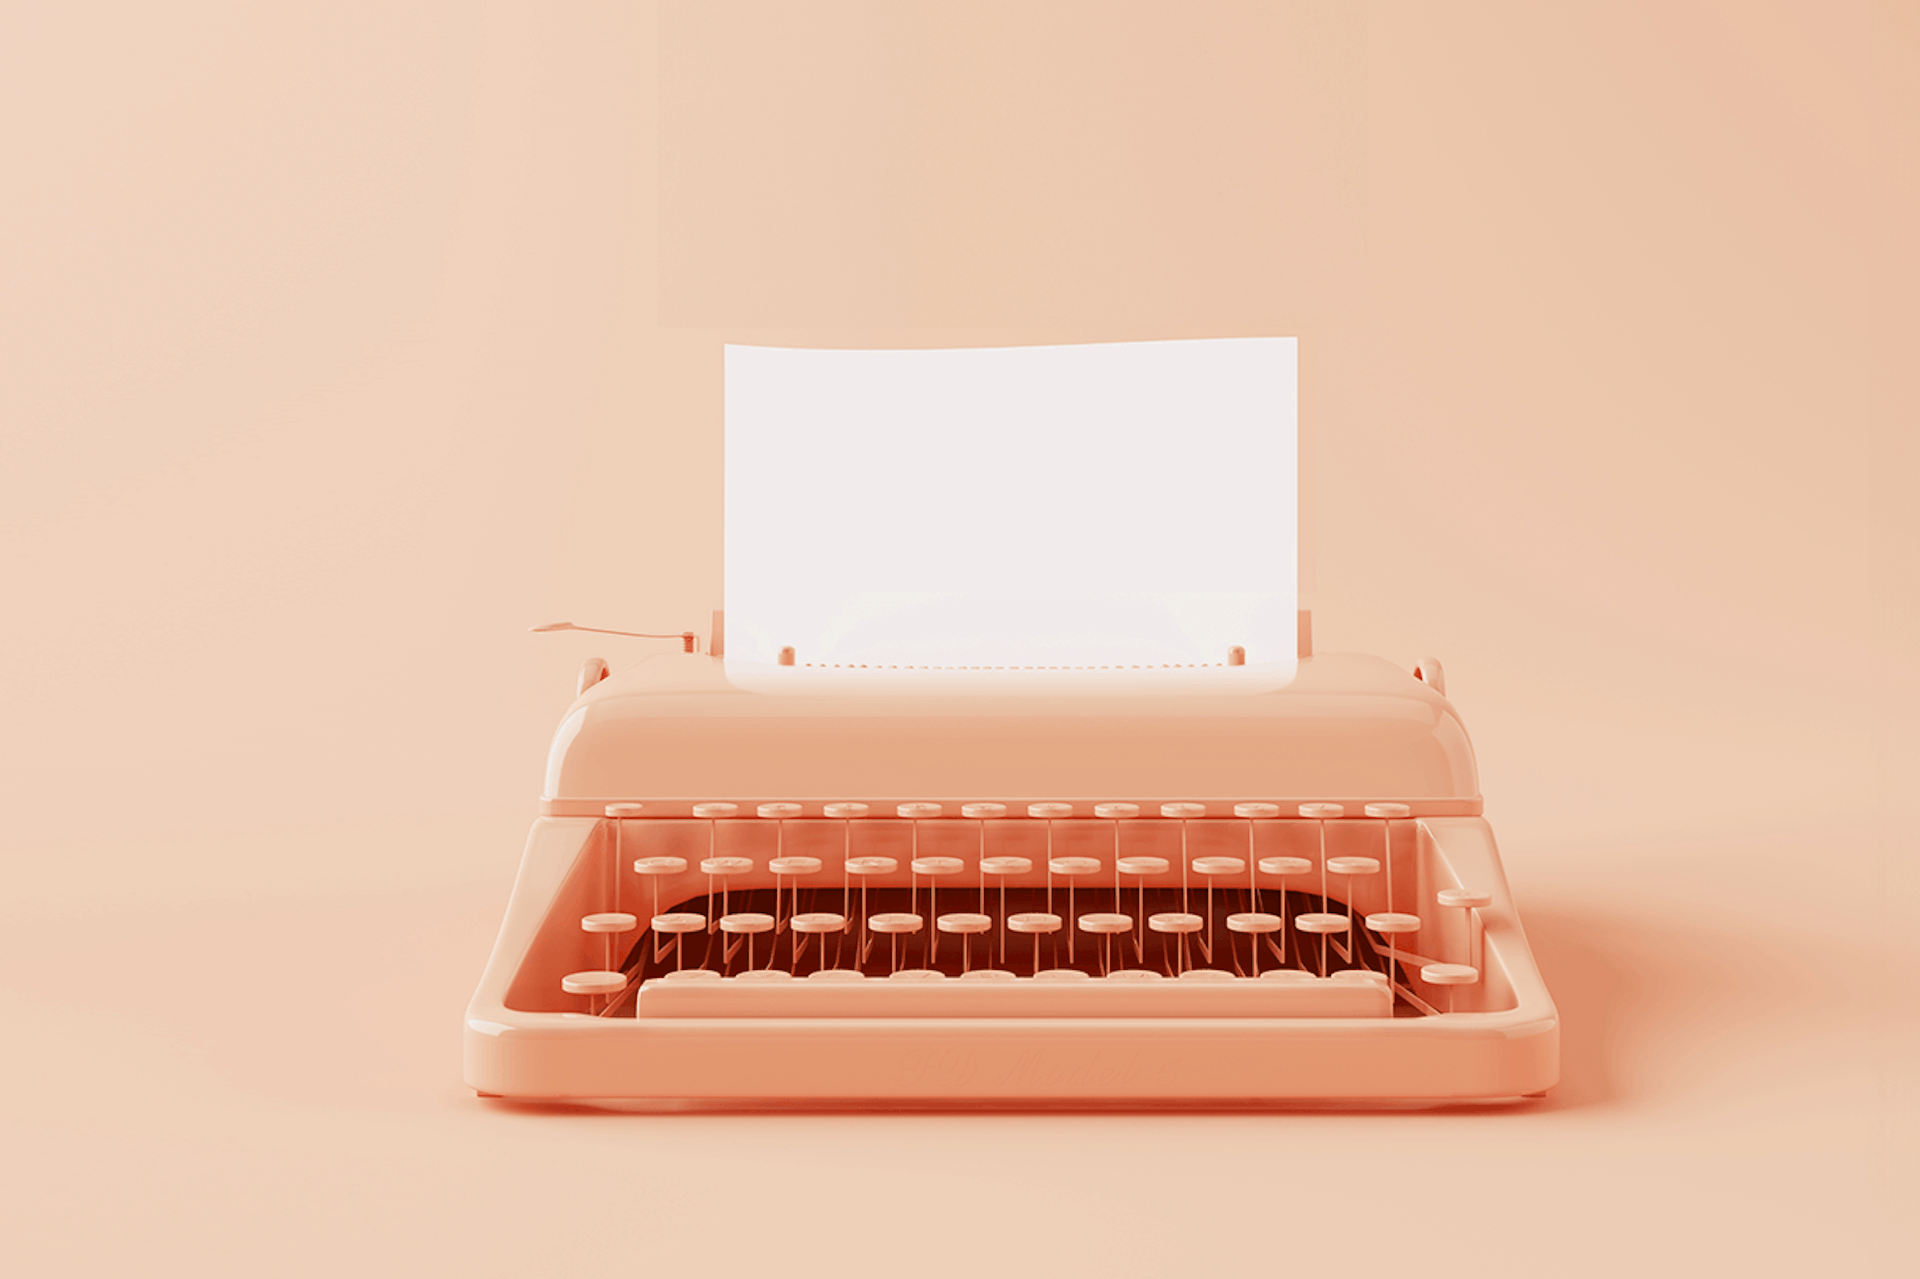 3D Illustration of an orange typewriter as the title image for our blog on South African print media